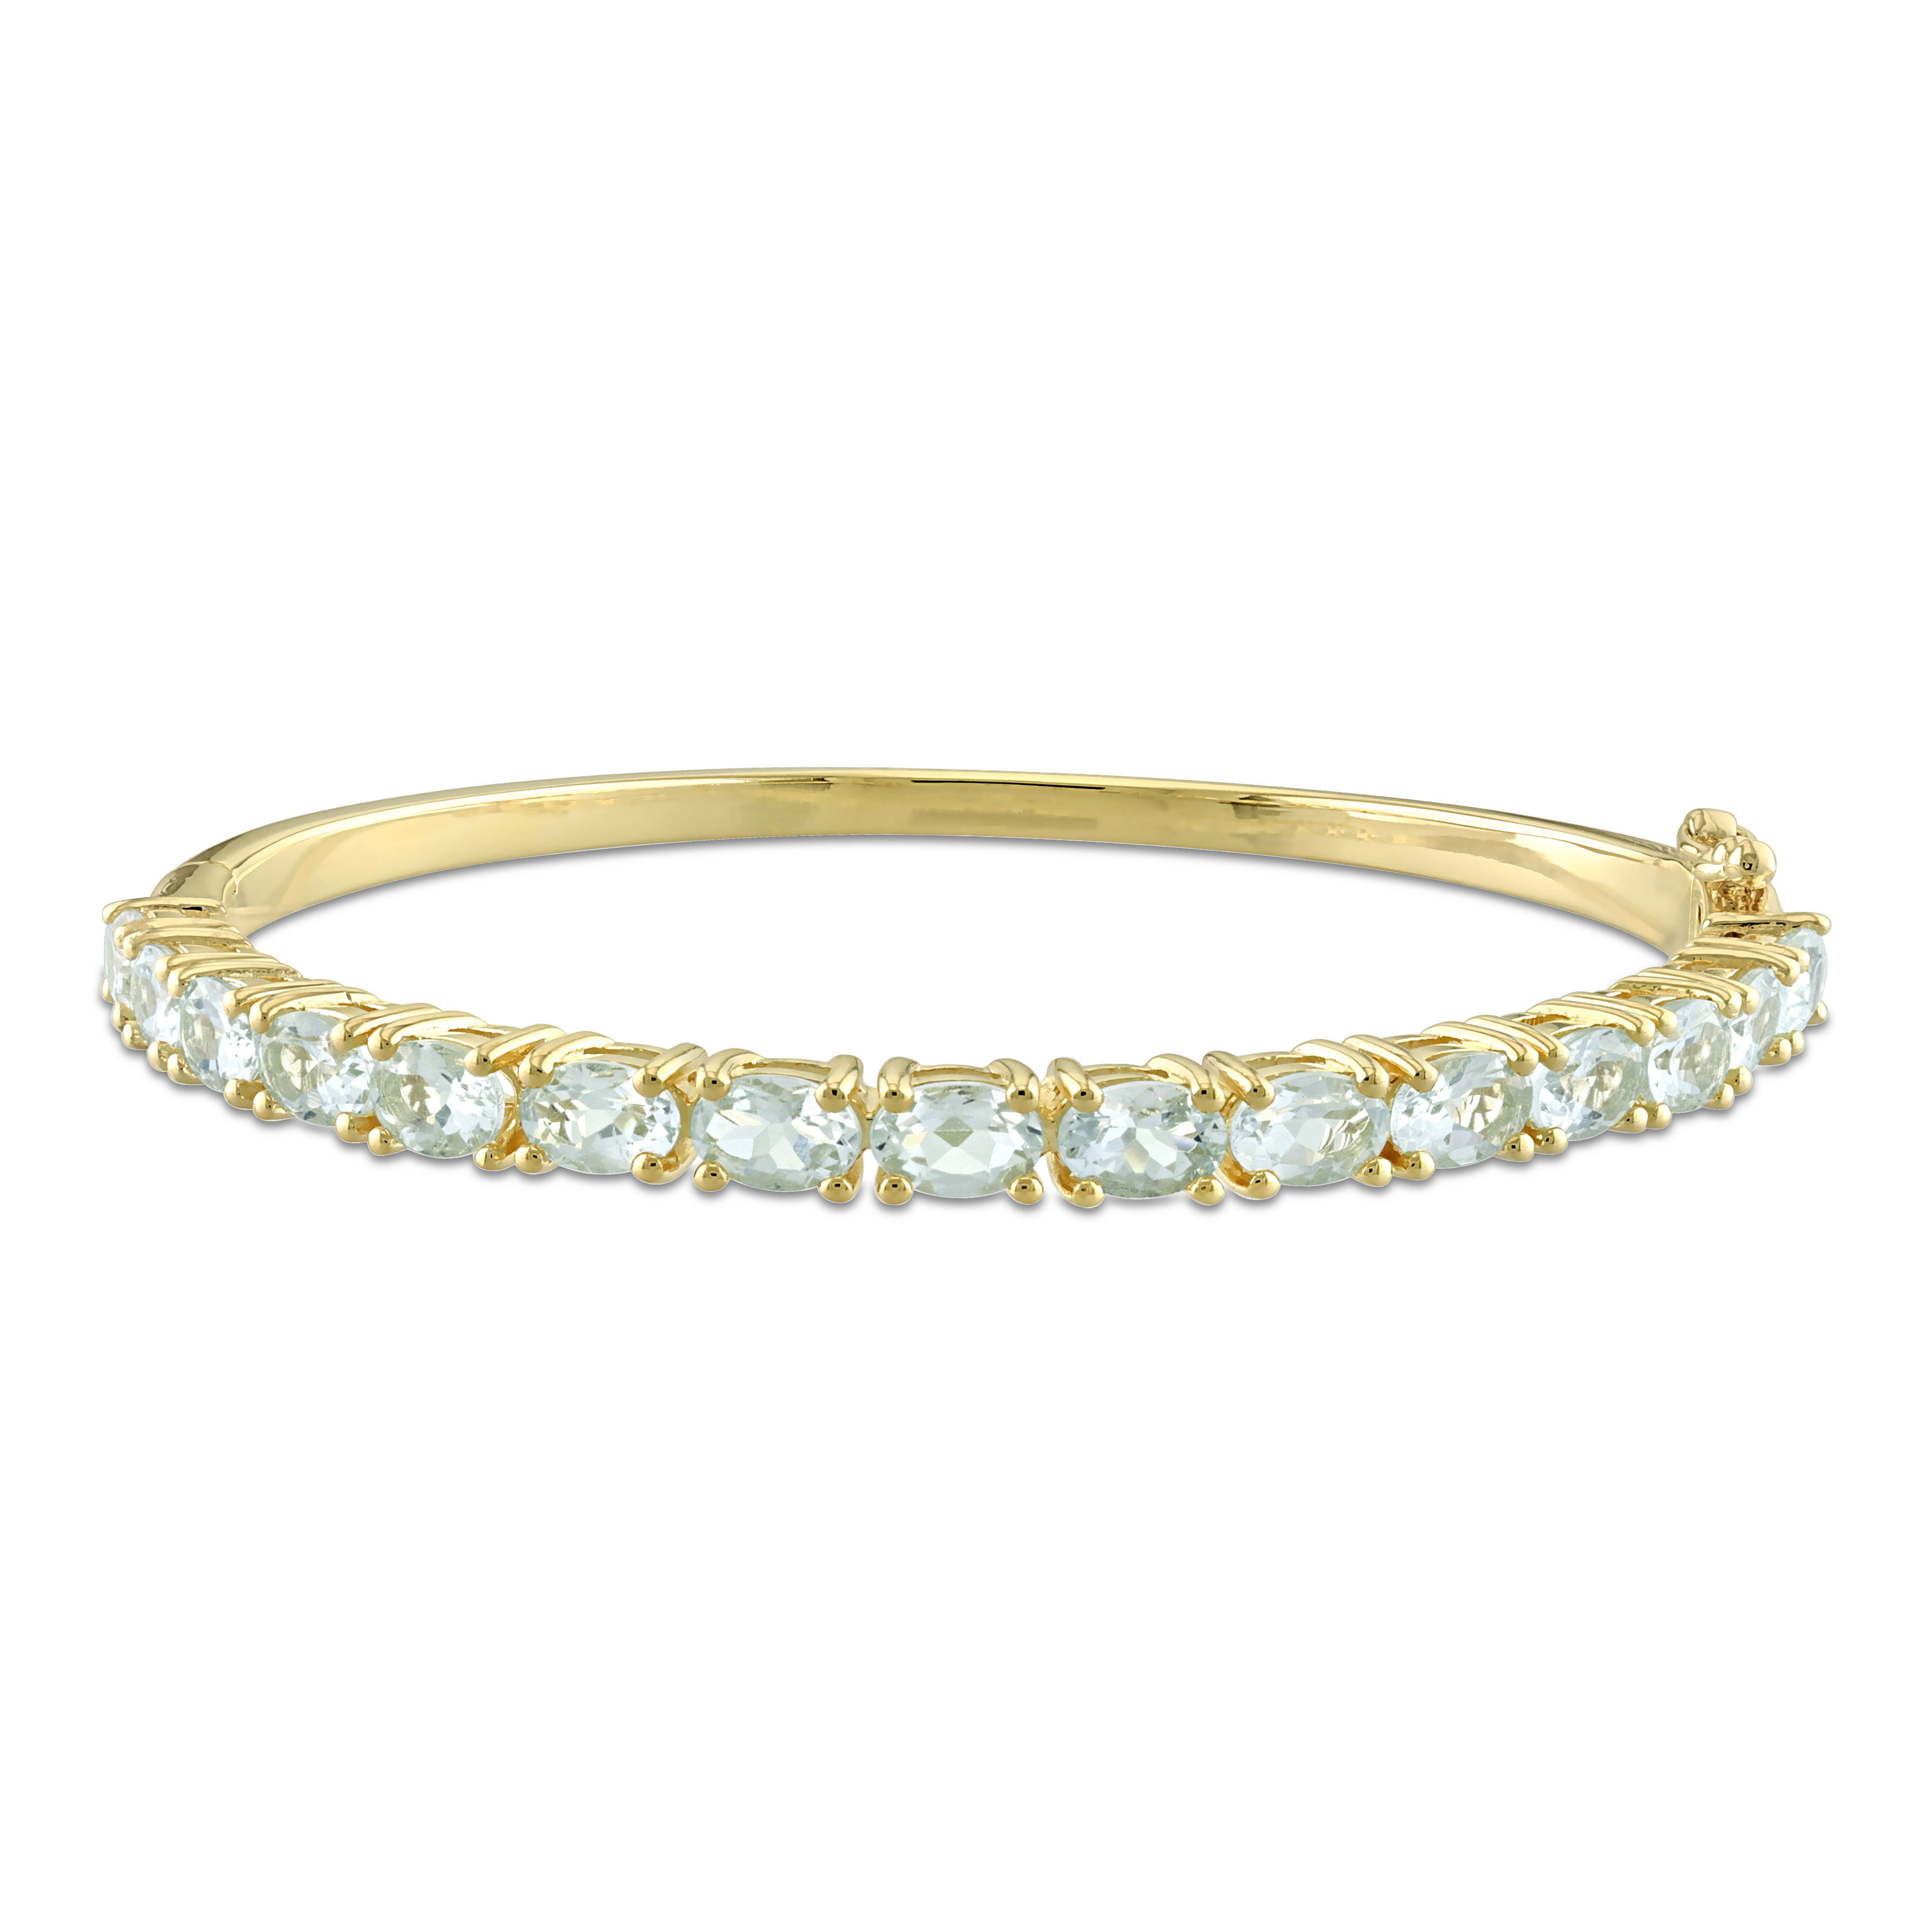 6 1/3 CT TGW Aquamarine Bangle in Yellow Plated Sterling Silver - 7 in.